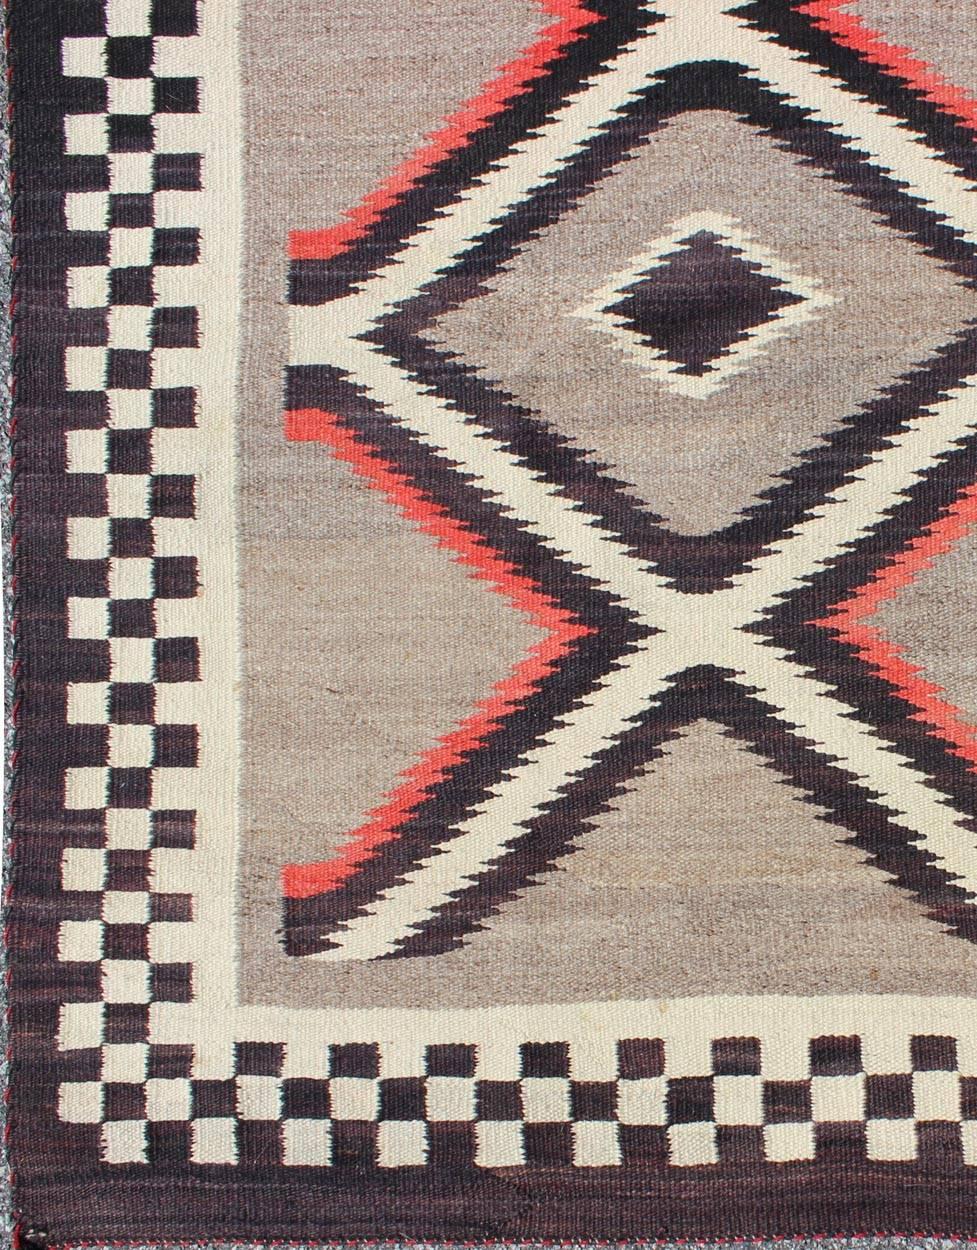 This intriguing vintage Navajo rug was woven in the United States during the first half of the 20th century. The exciting and unique composition boasts a captivating geometric composition with an all-over diamond design. The range of colors includes